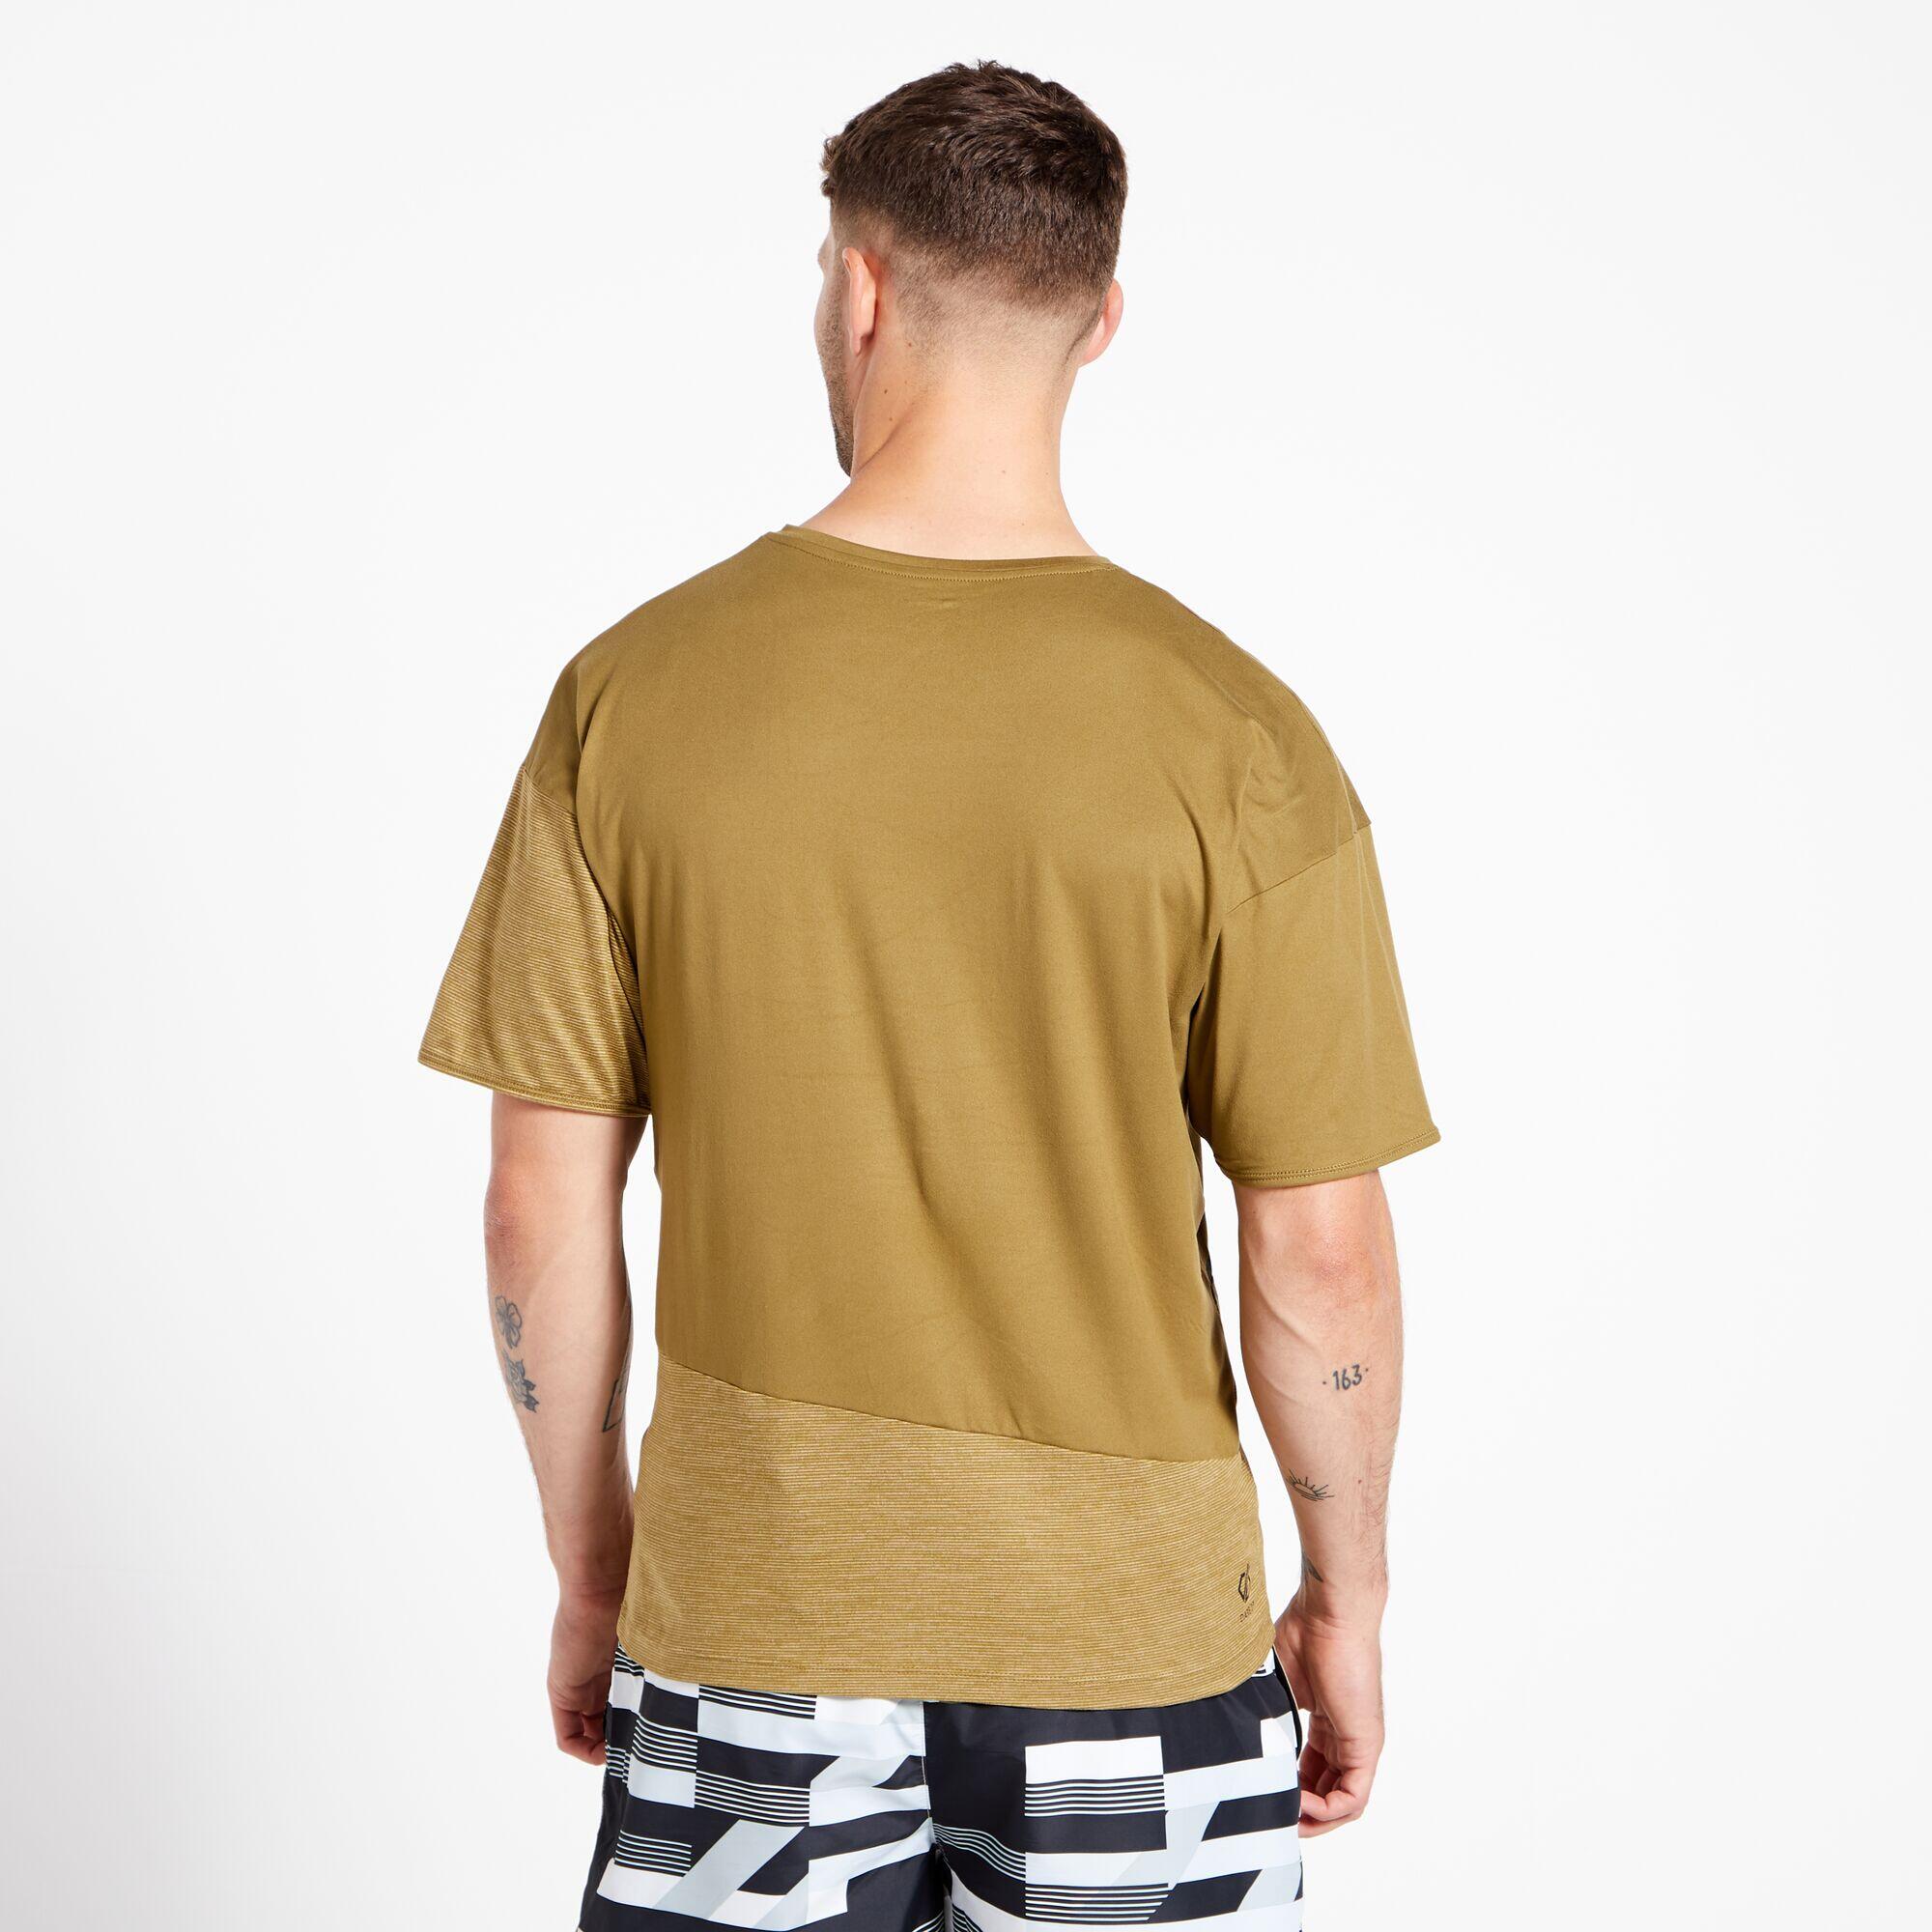 Henry Holland No Sweat Mens Gym Active T-Shirt - Olive Green 2/4